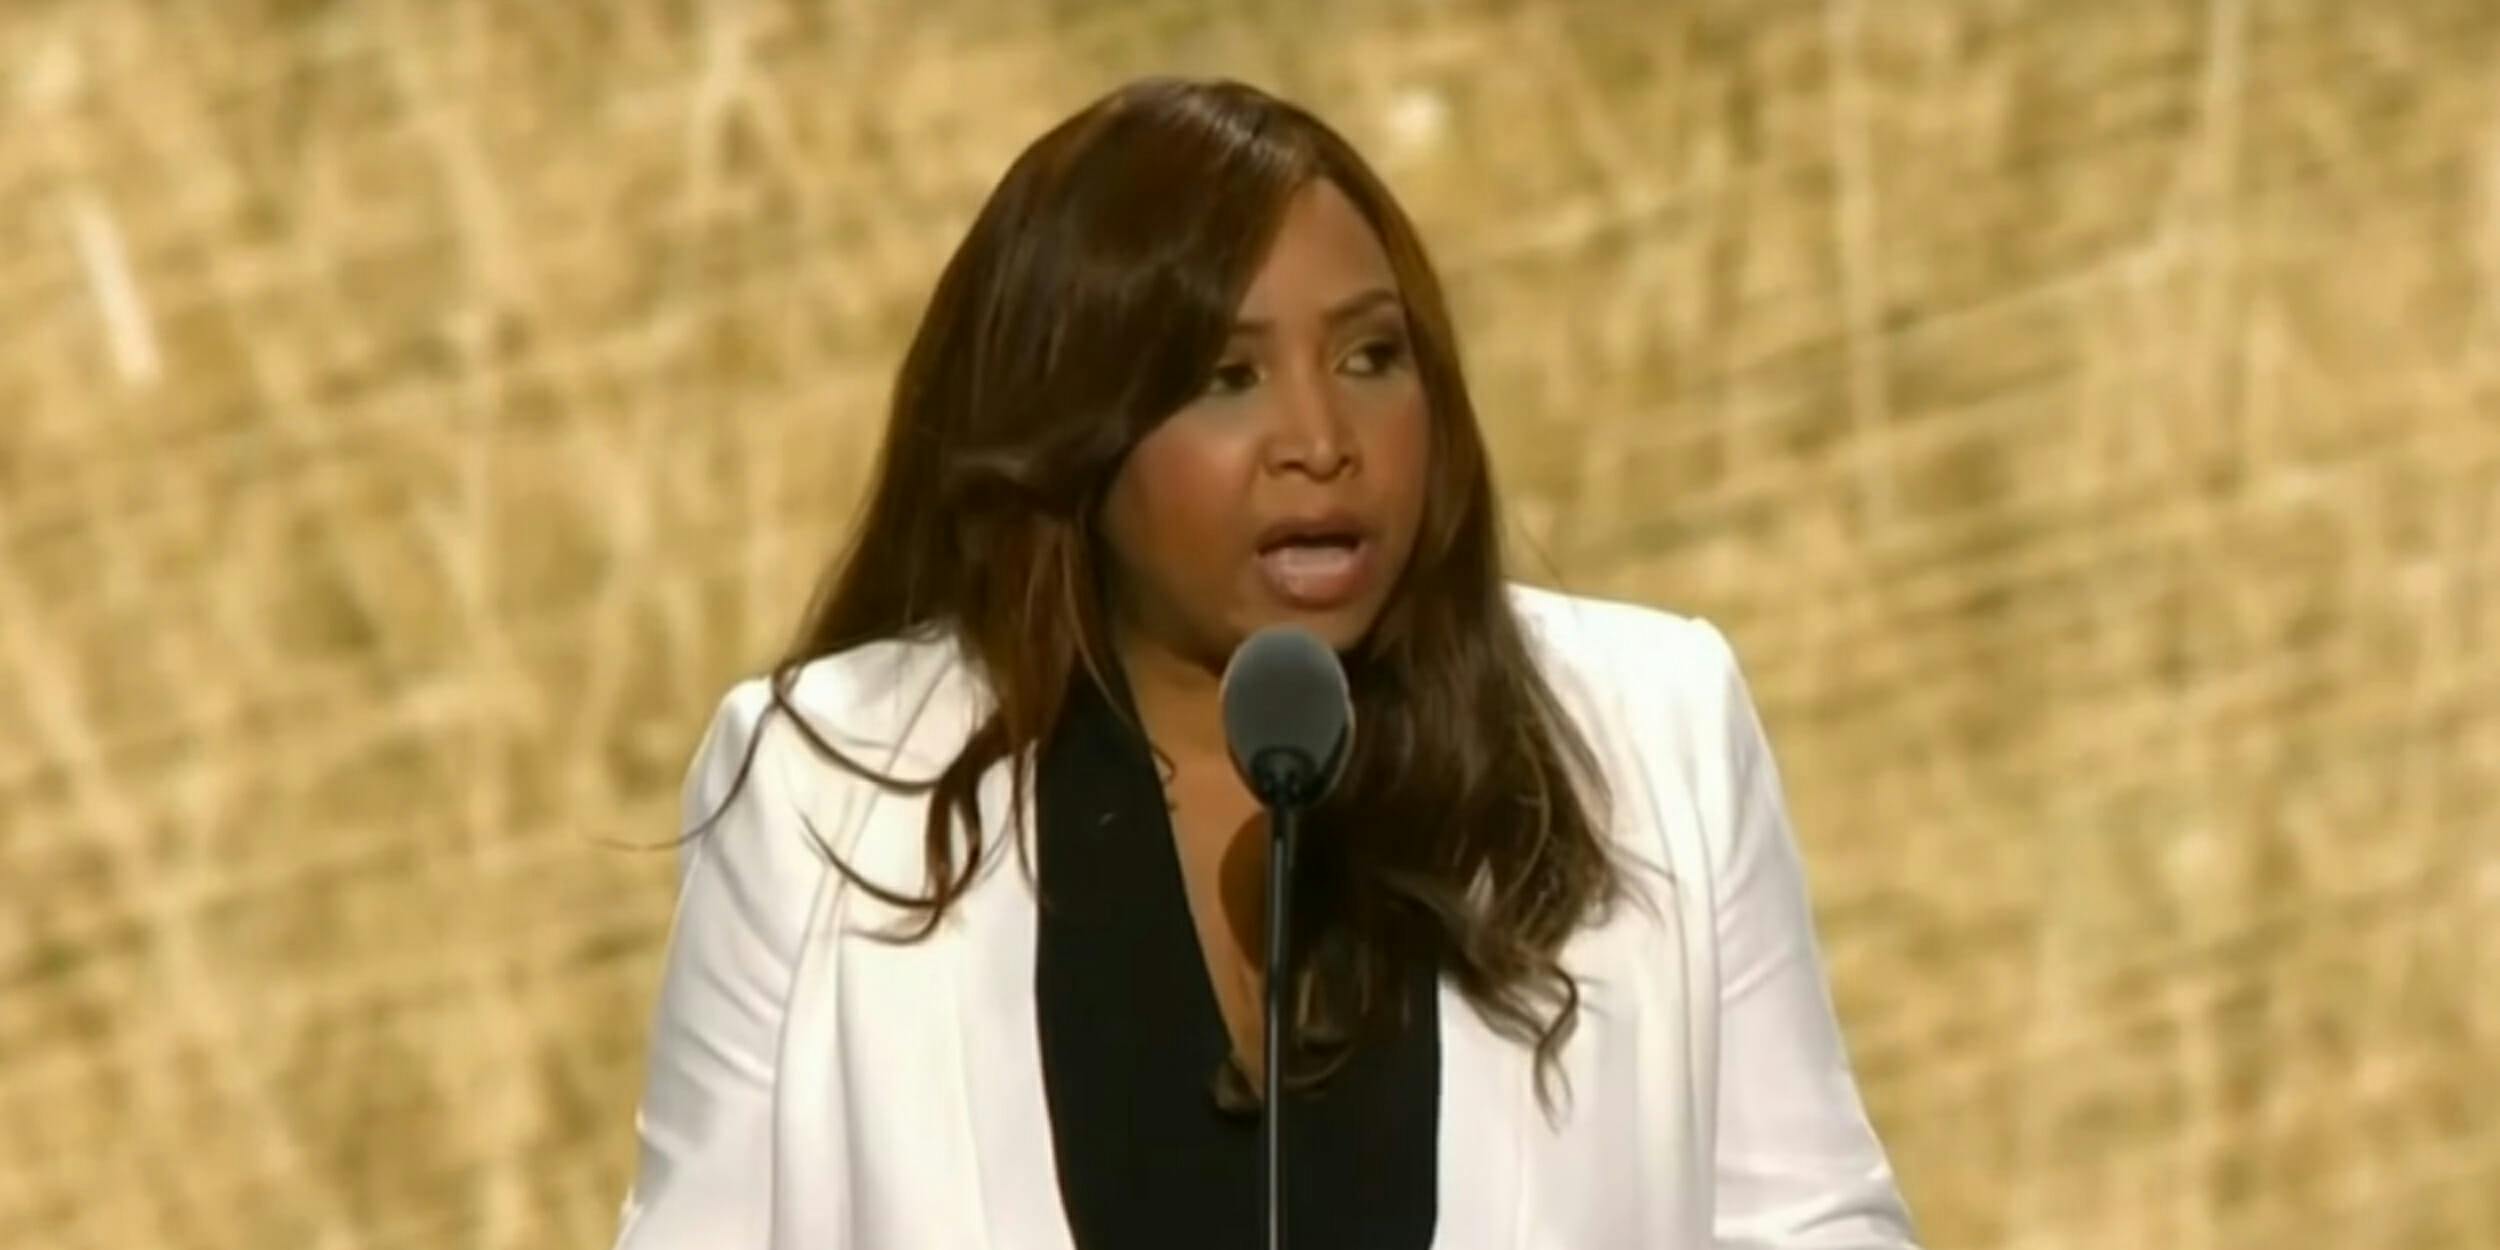 Lynne Patton of The Eric Trump Foundation speaks at the RNC in Cleveland.